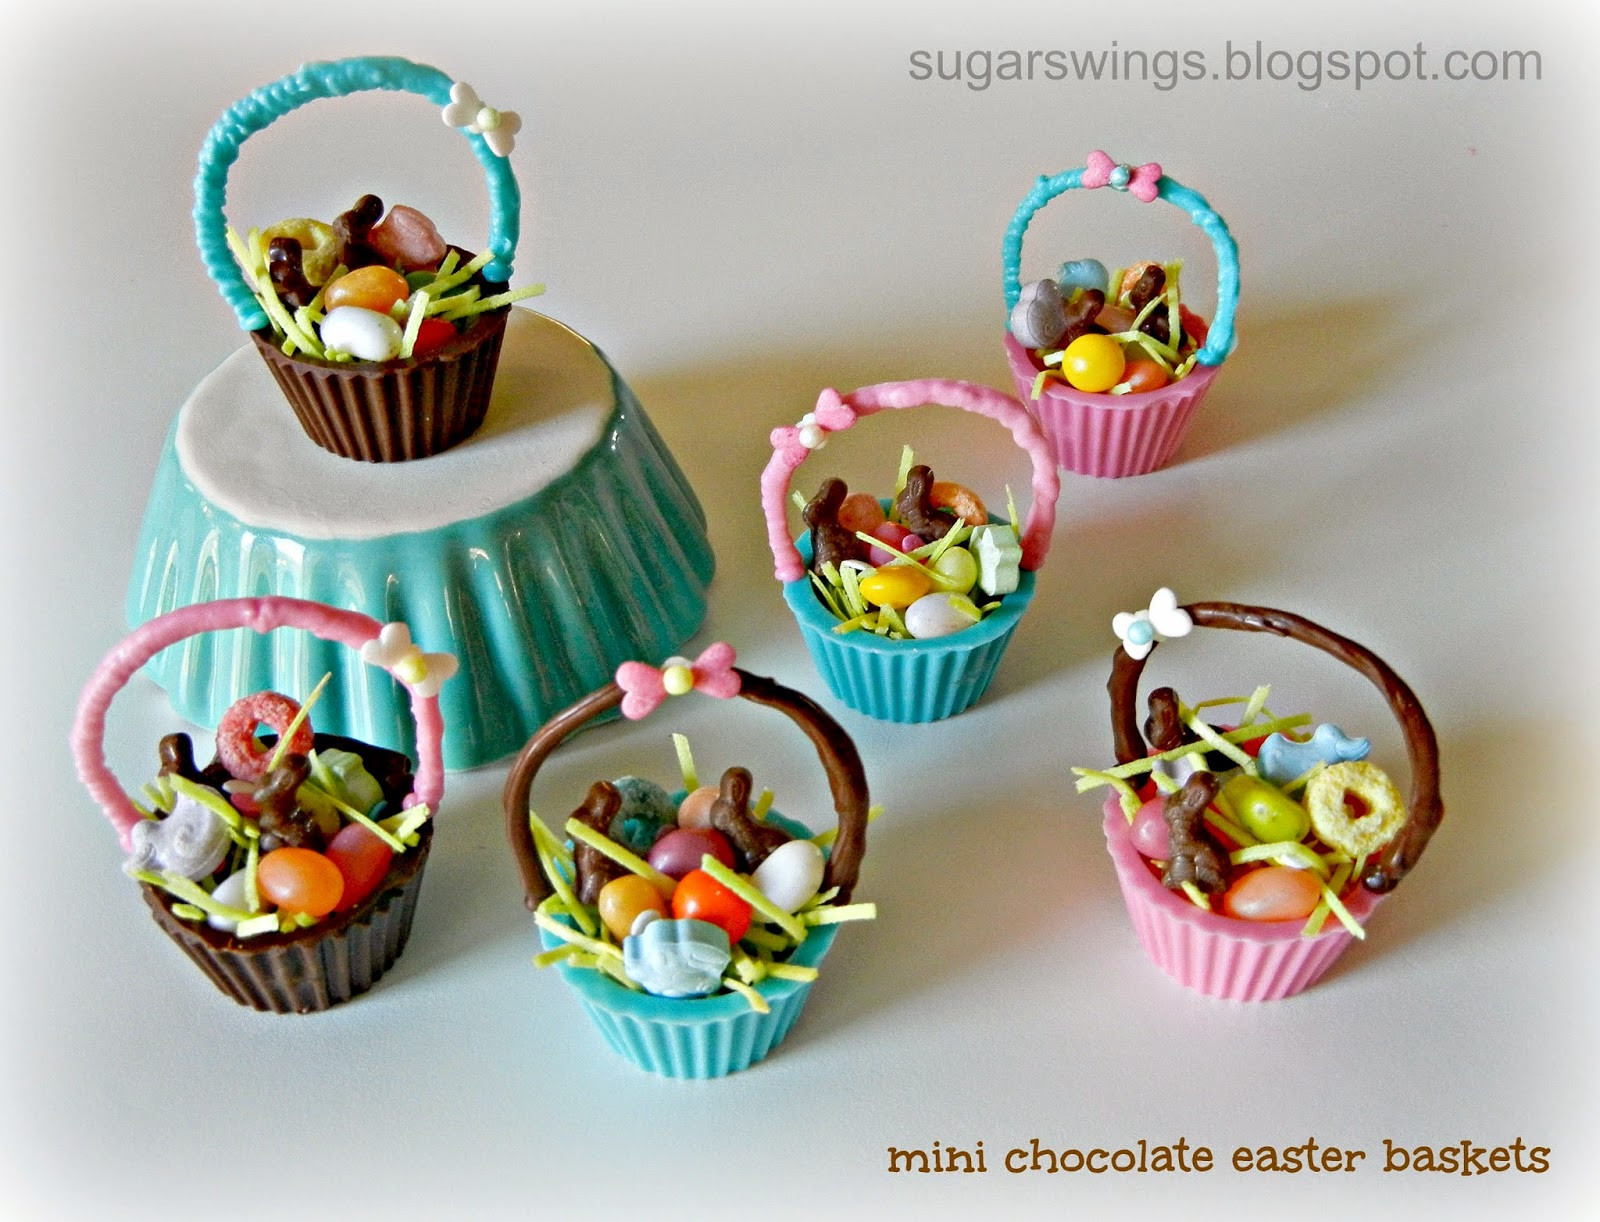 Edible Arrangements Easter Gifts
 Sugar Swings Serve Some Mini Chocolate All Edible Easter